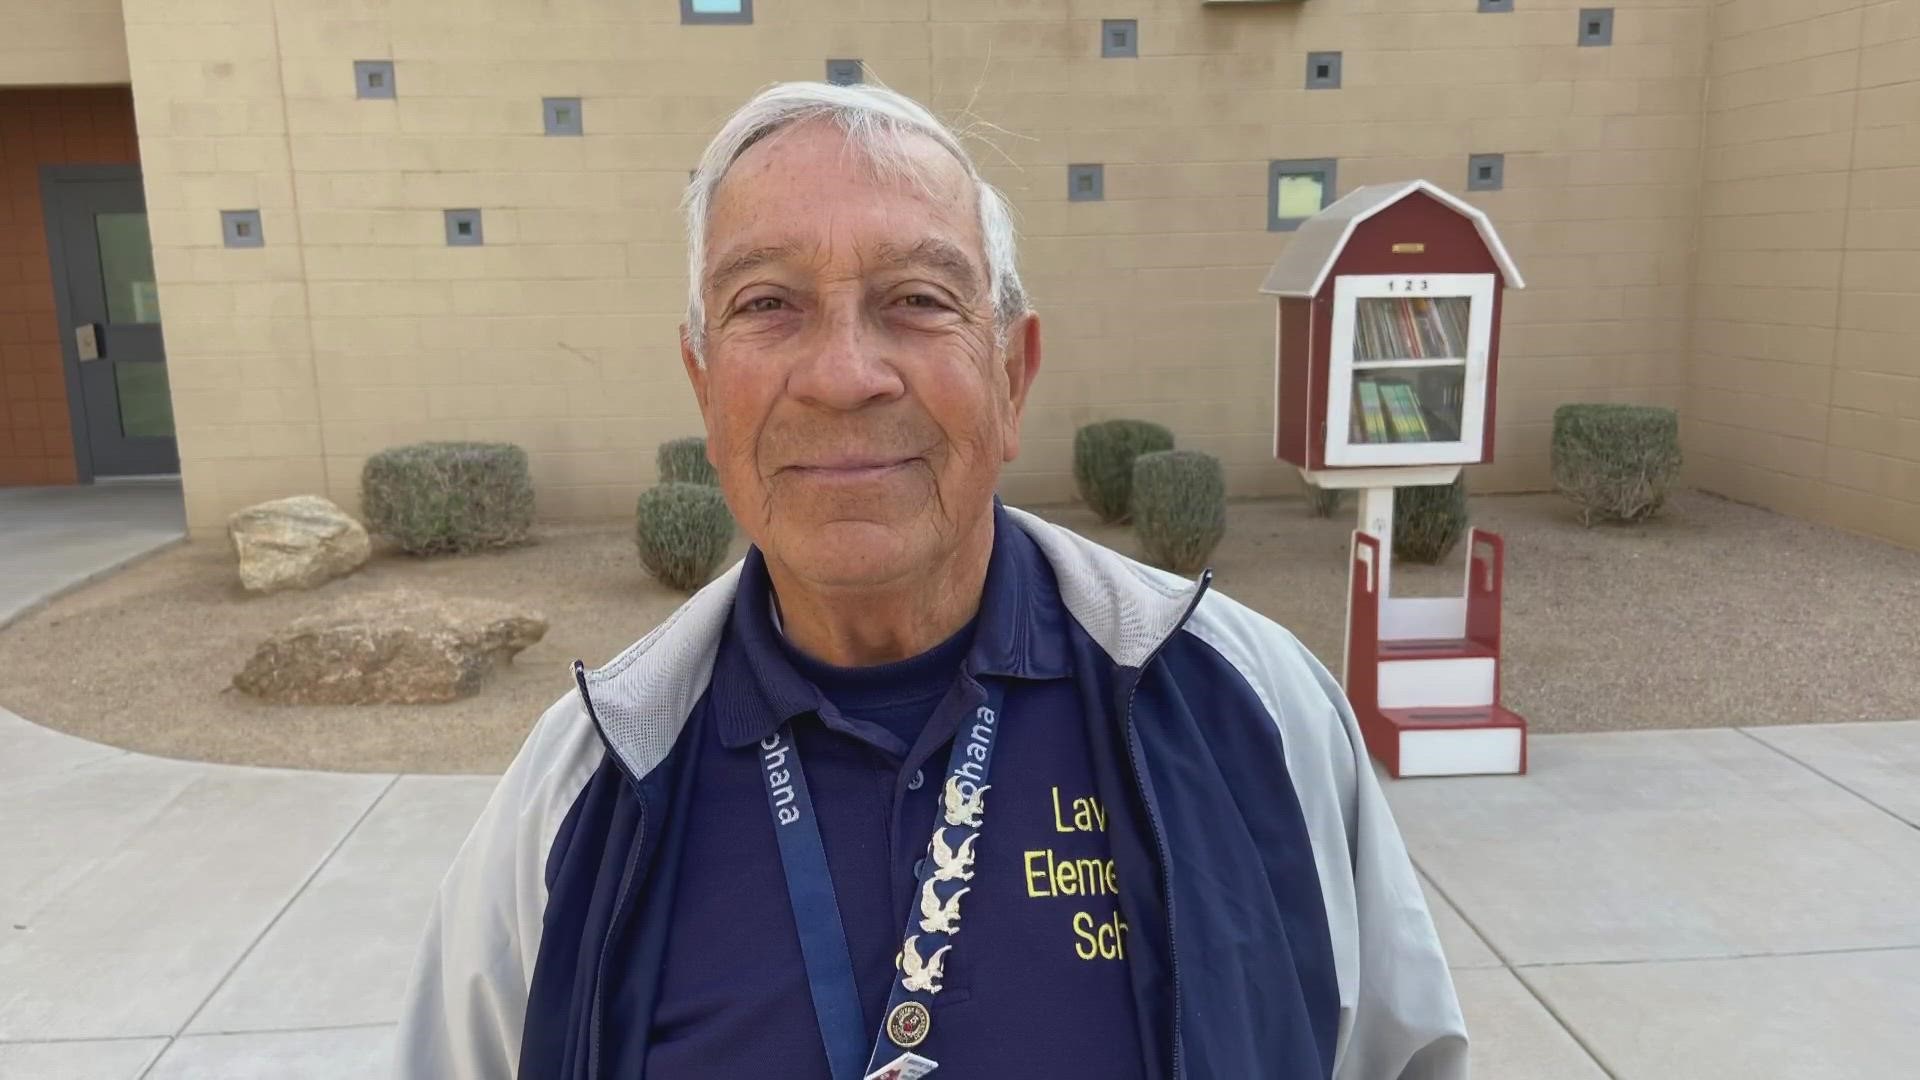 A Laveen man is working to inspire kids to help foster a love of reading through the construction of little libraries throughout his district.